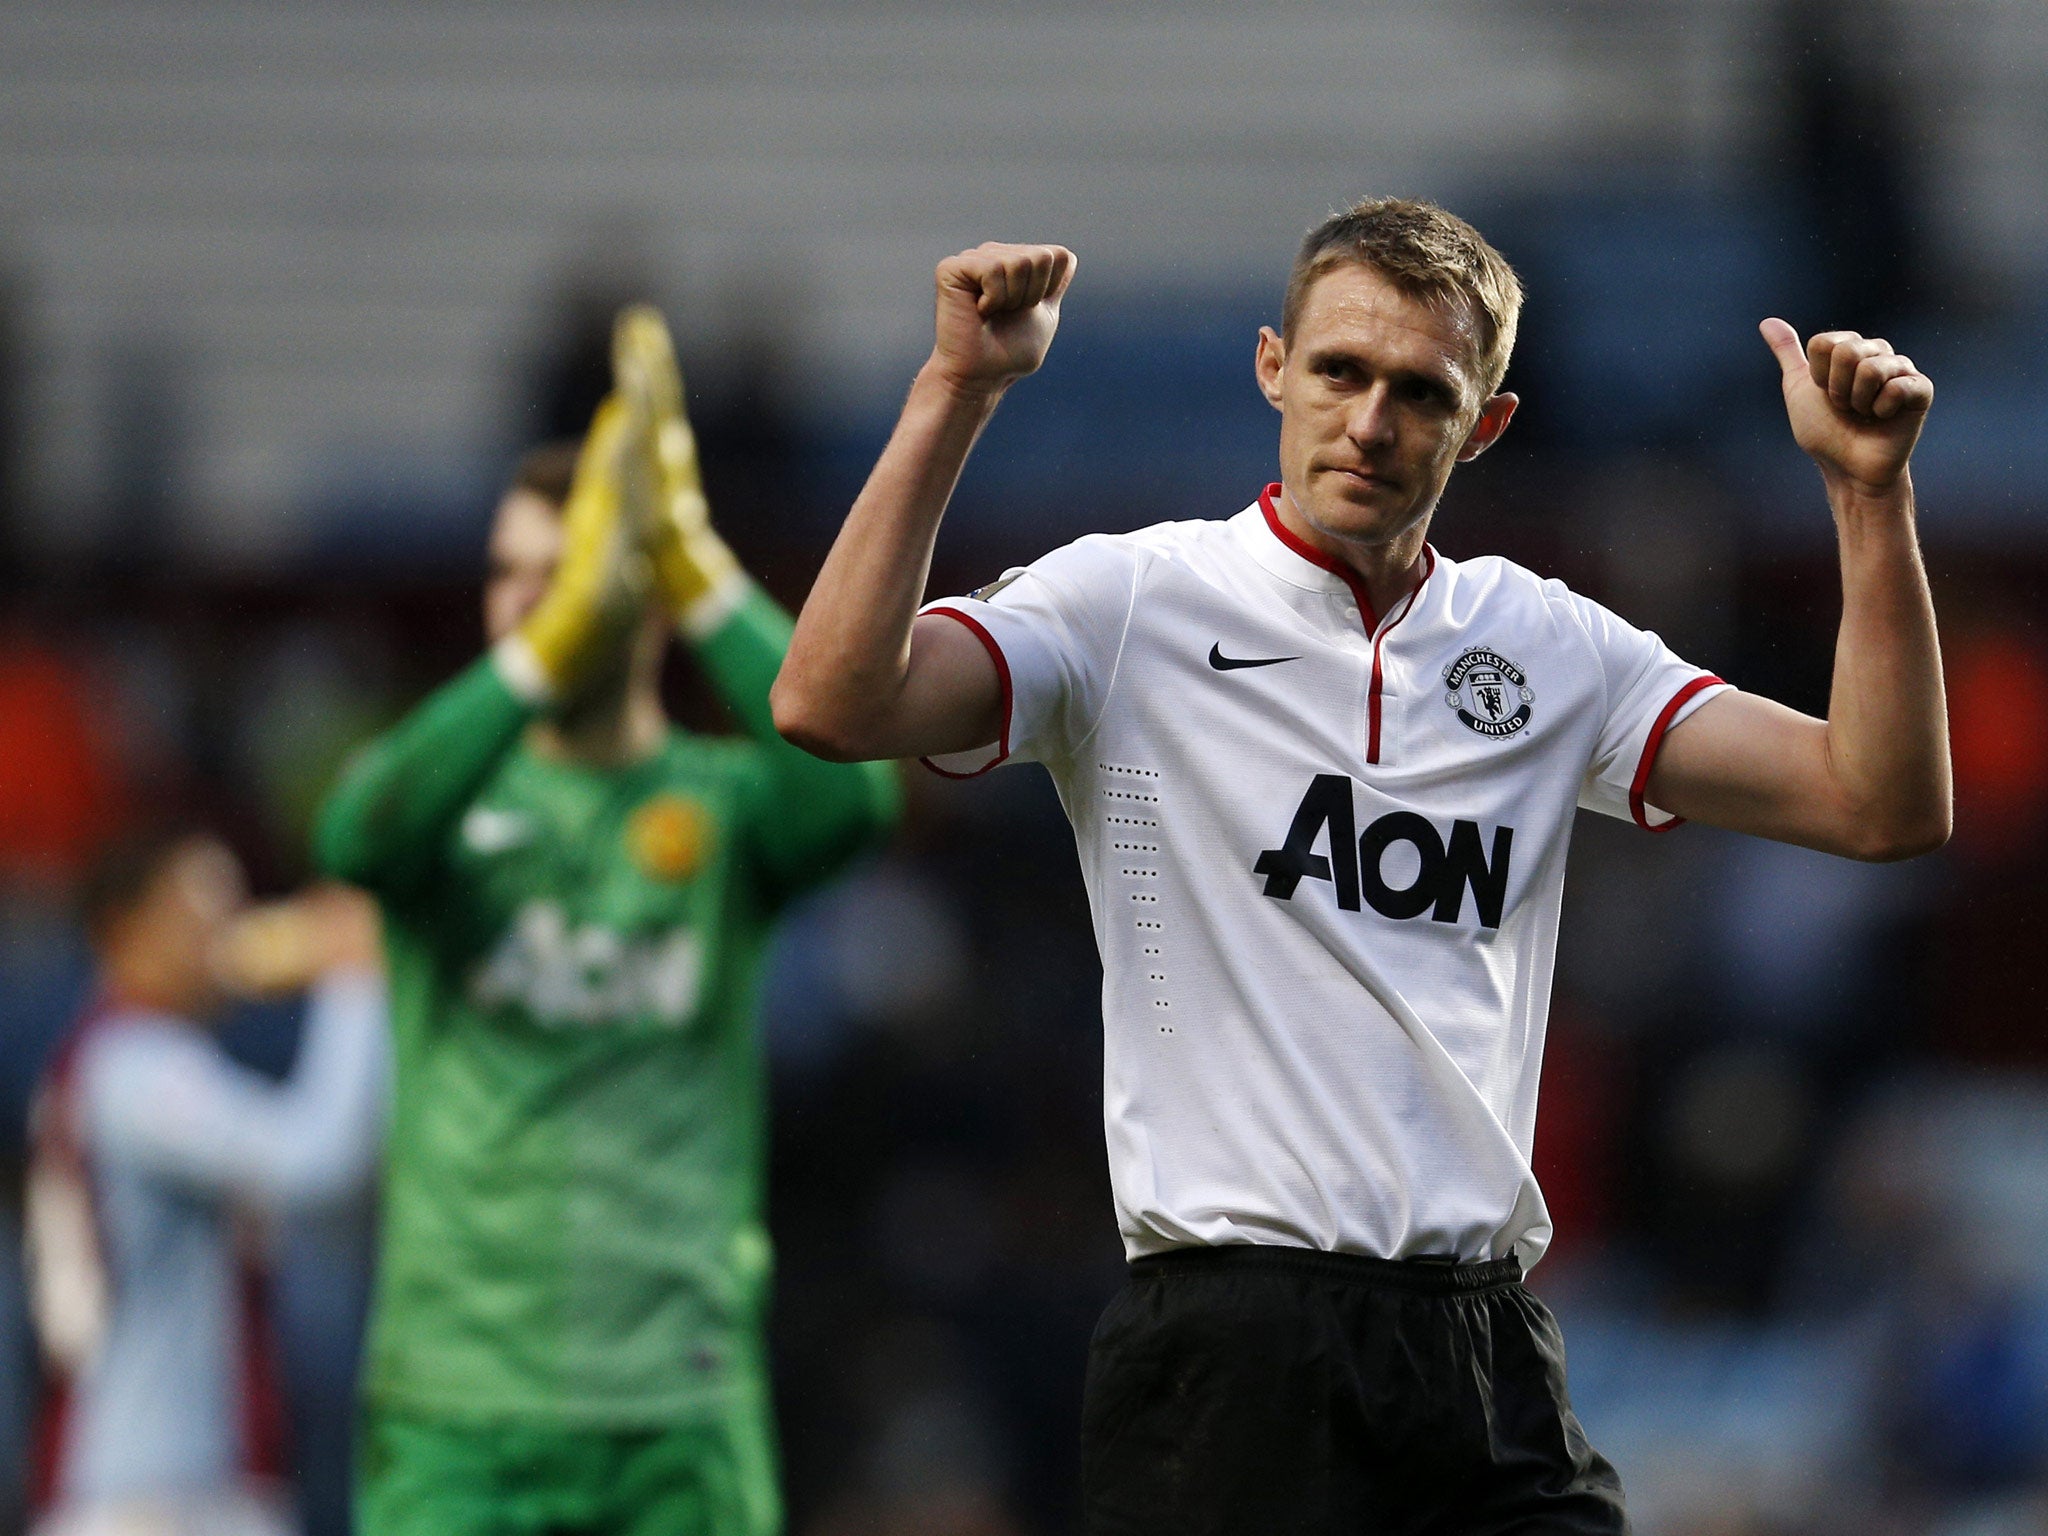 Darren Fletcher pictured since returning to action for United